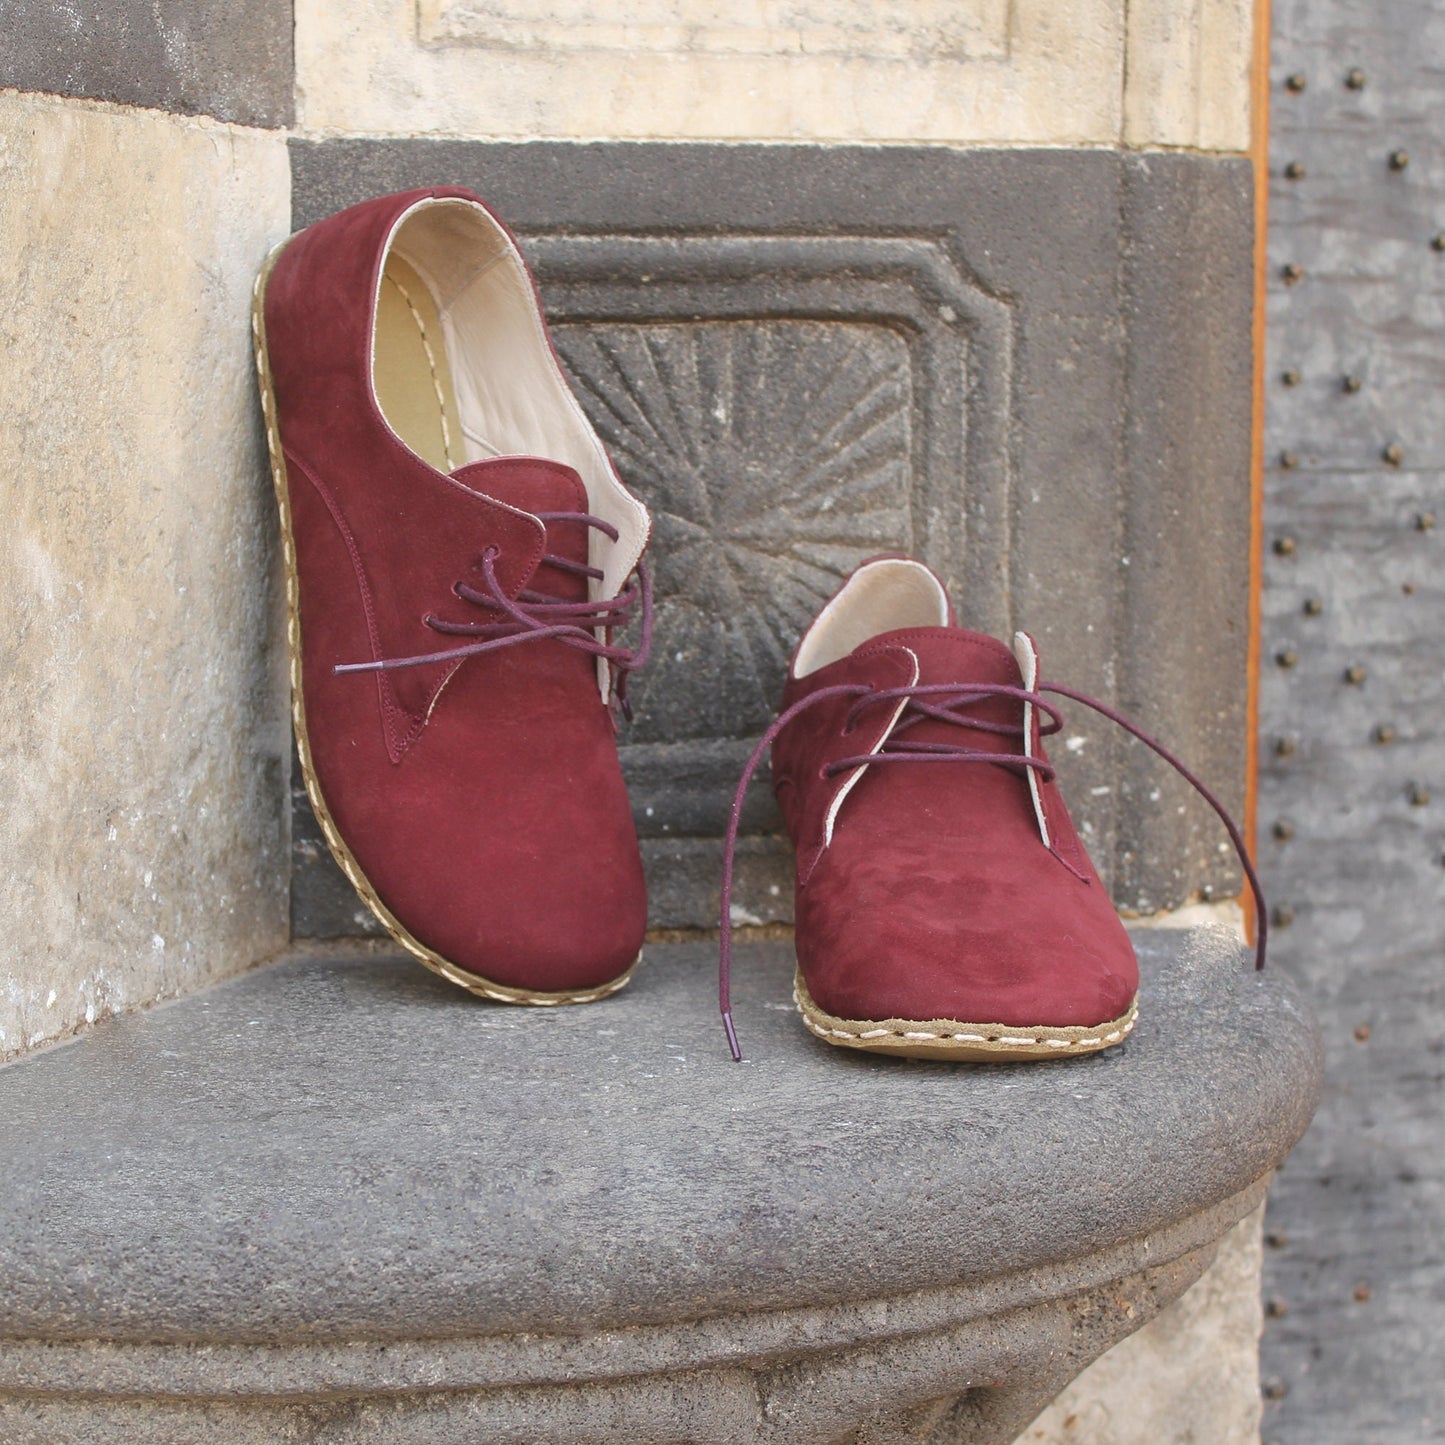 Men Barefoot Shoes, Handmade, Claret Red Leather Shoes